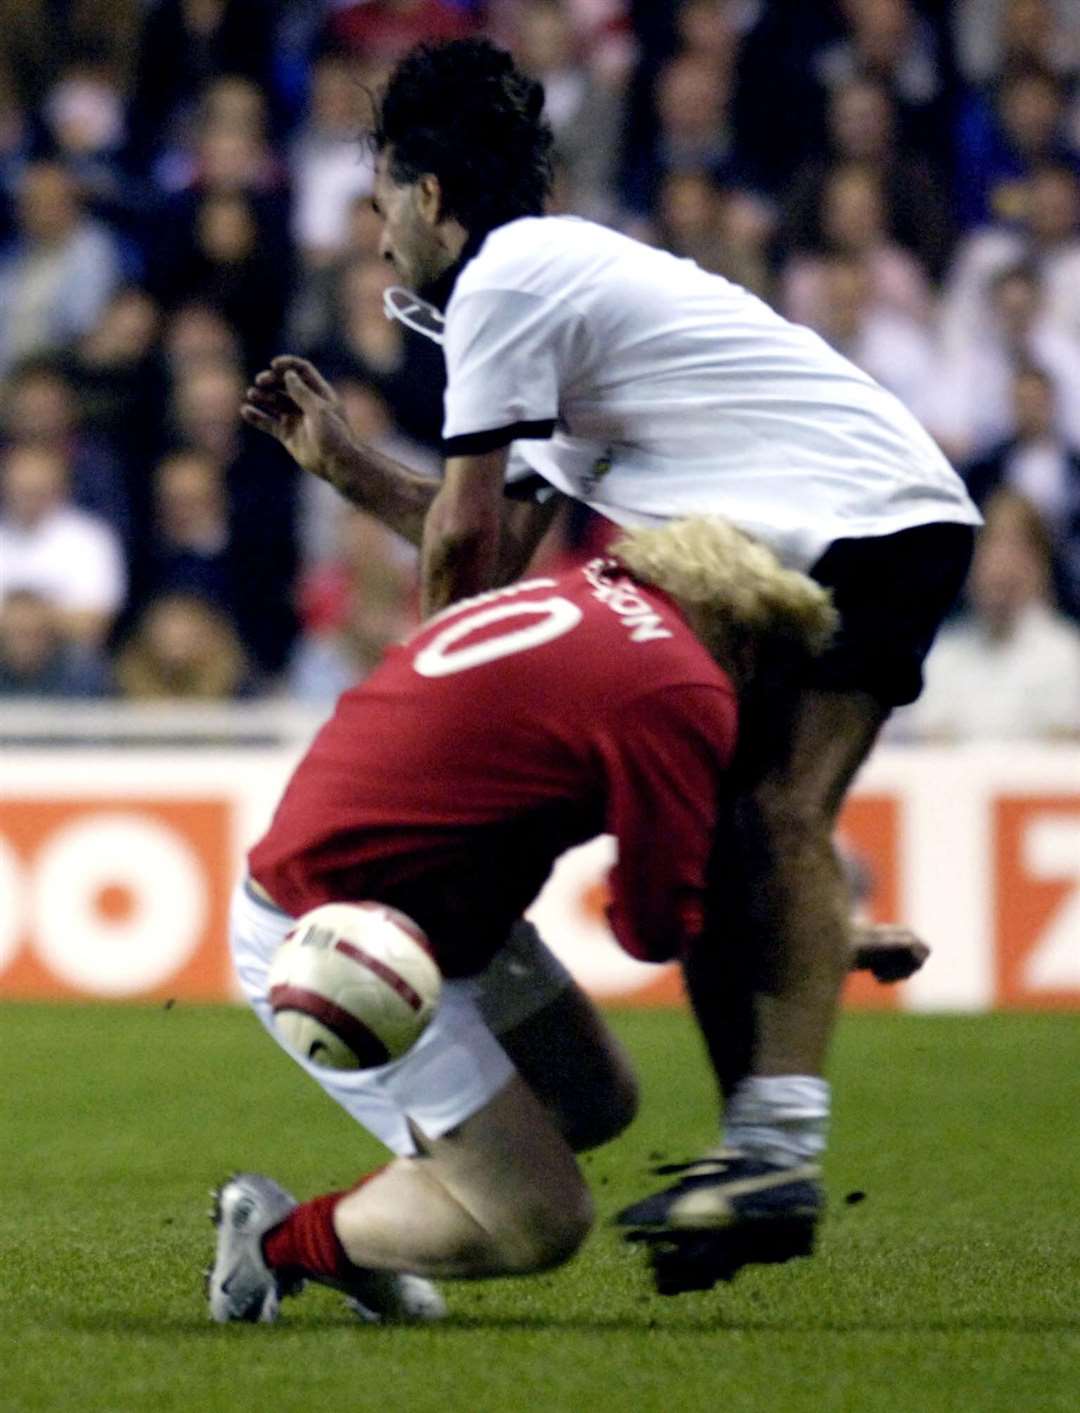 Mr Johnson forces a rugby tackle on German footballer Maurizio Gaudino during a legends match in Reading in 2006 (Rebecca Naden/PA)